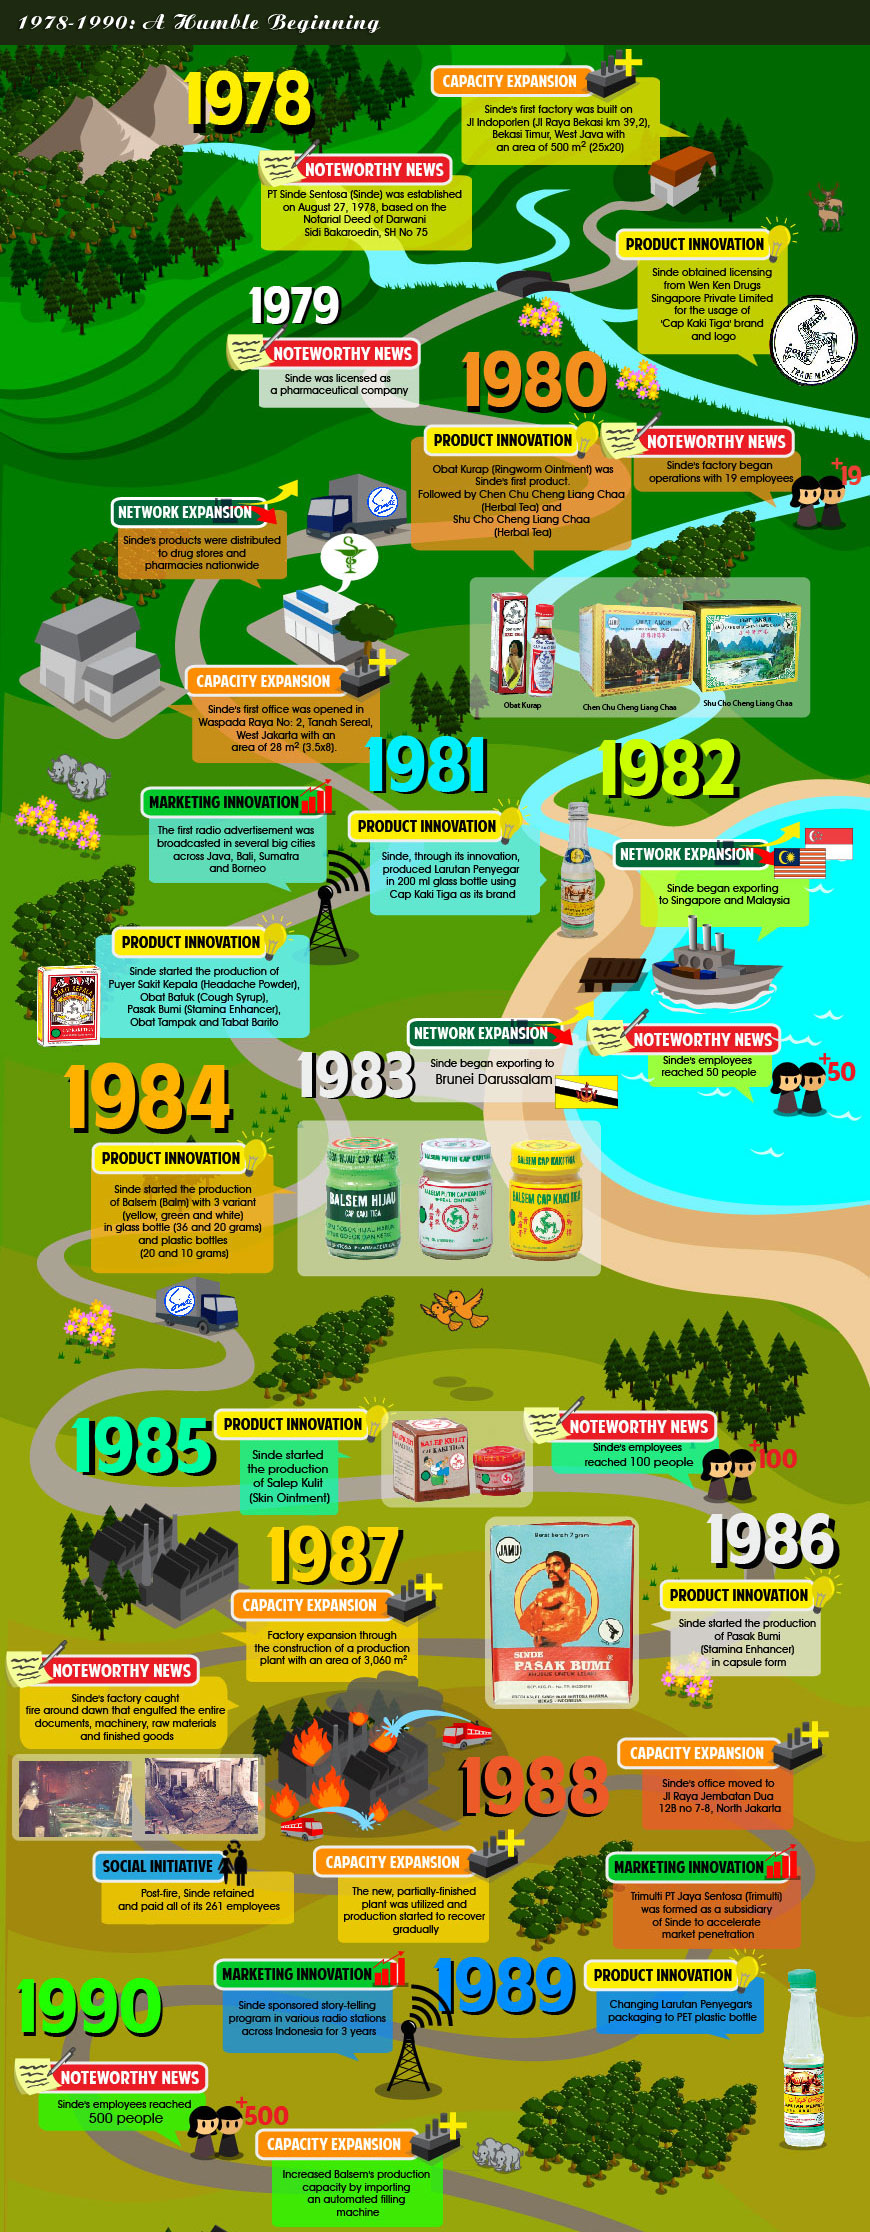 infographic-sinde-history-1